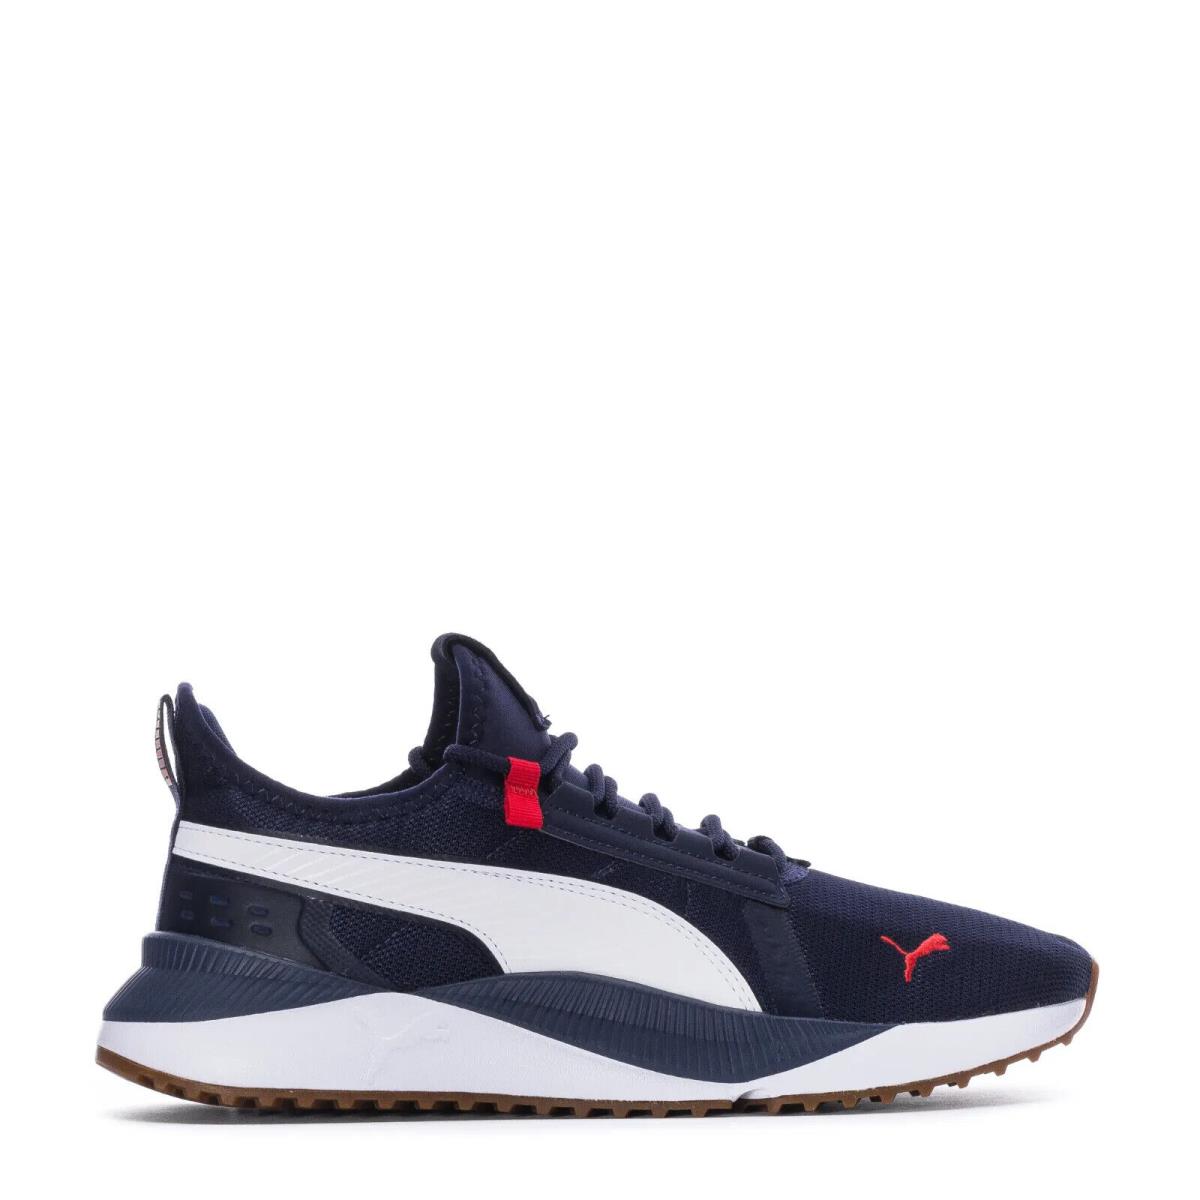 Puma Pacer Future Street Plus 384634-04 Peacoat/white/high Risk Red Shoes